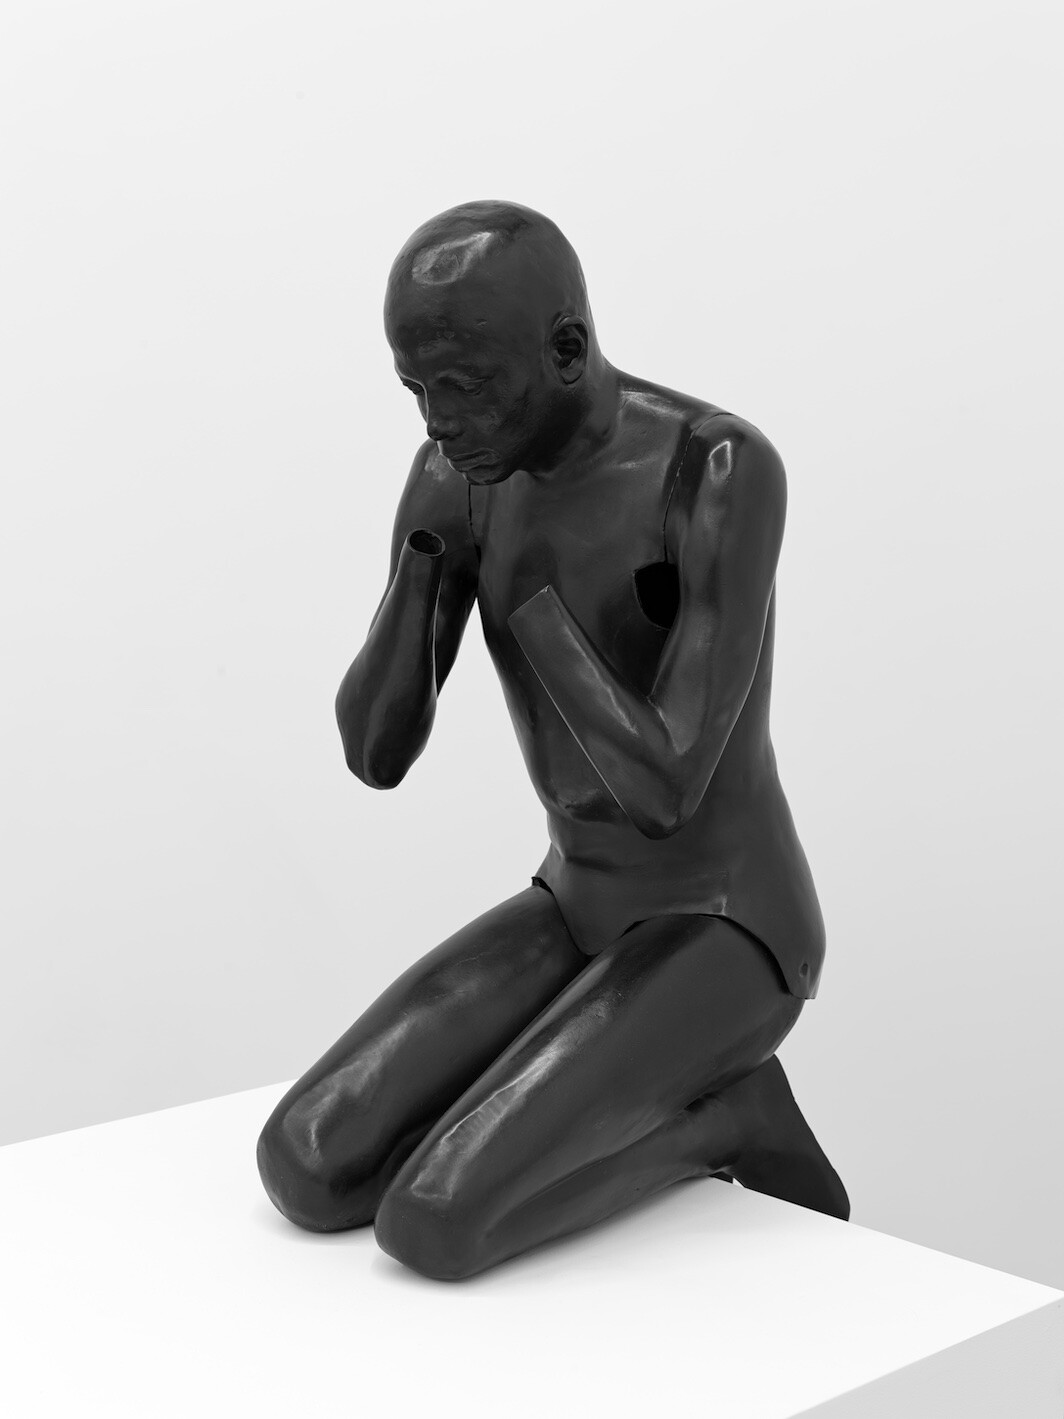 Nicole Miller, Michael in Black, 2018, patinated bronze, 42 x 15 1/2 x 22". Courtesy the artist and Kristina Kite Gallery, Los Angeles